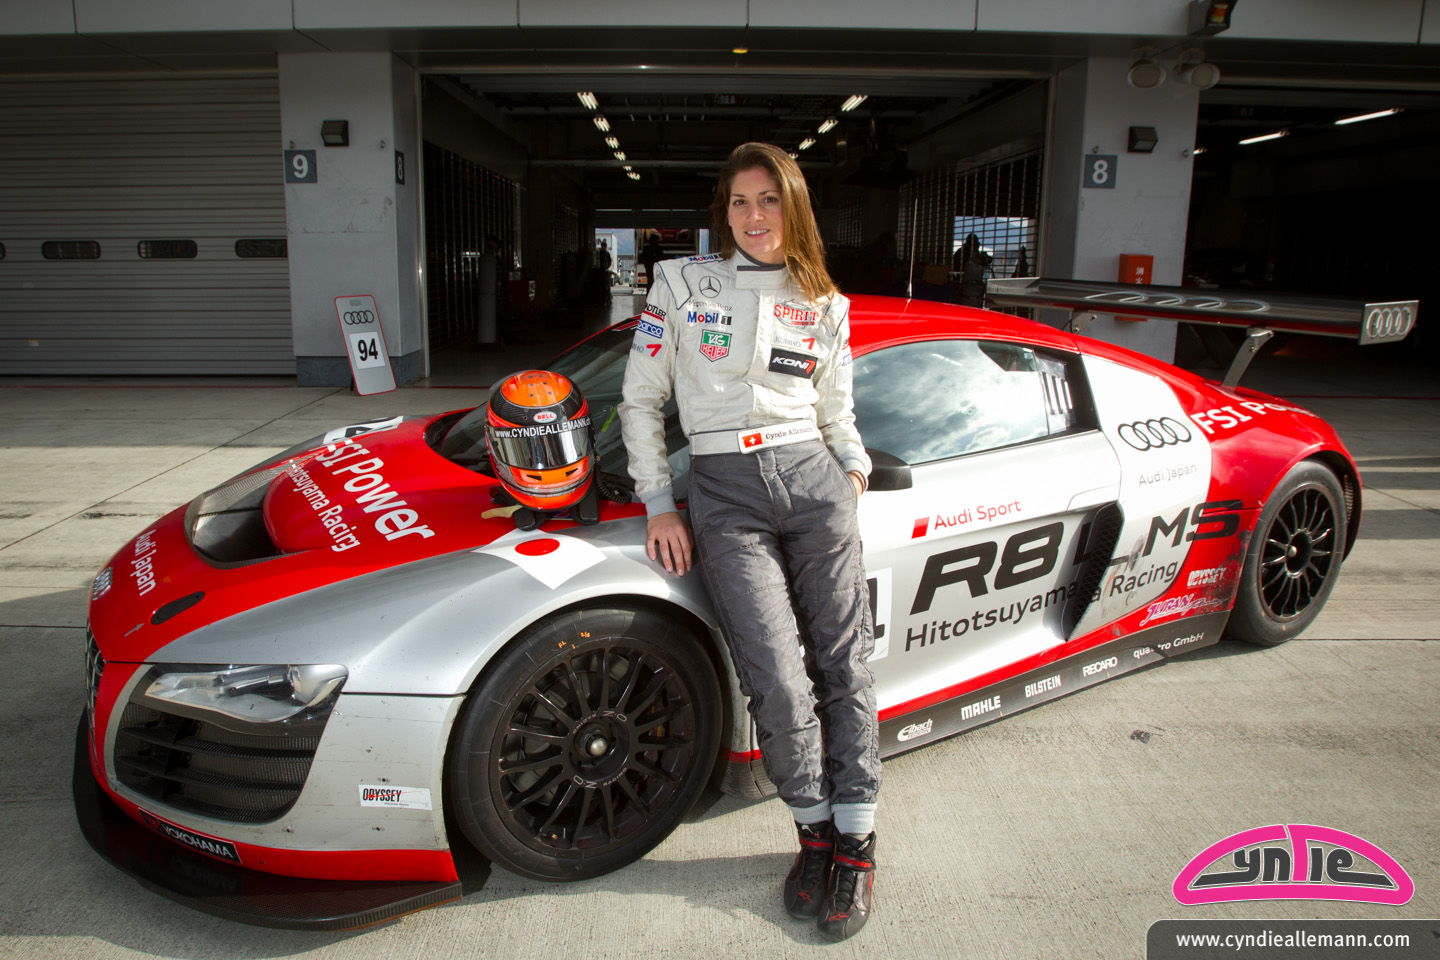 Big in Japan: Cyndie Allemann to race with Hitotsuyama Racing in the Super GT Series in 2012